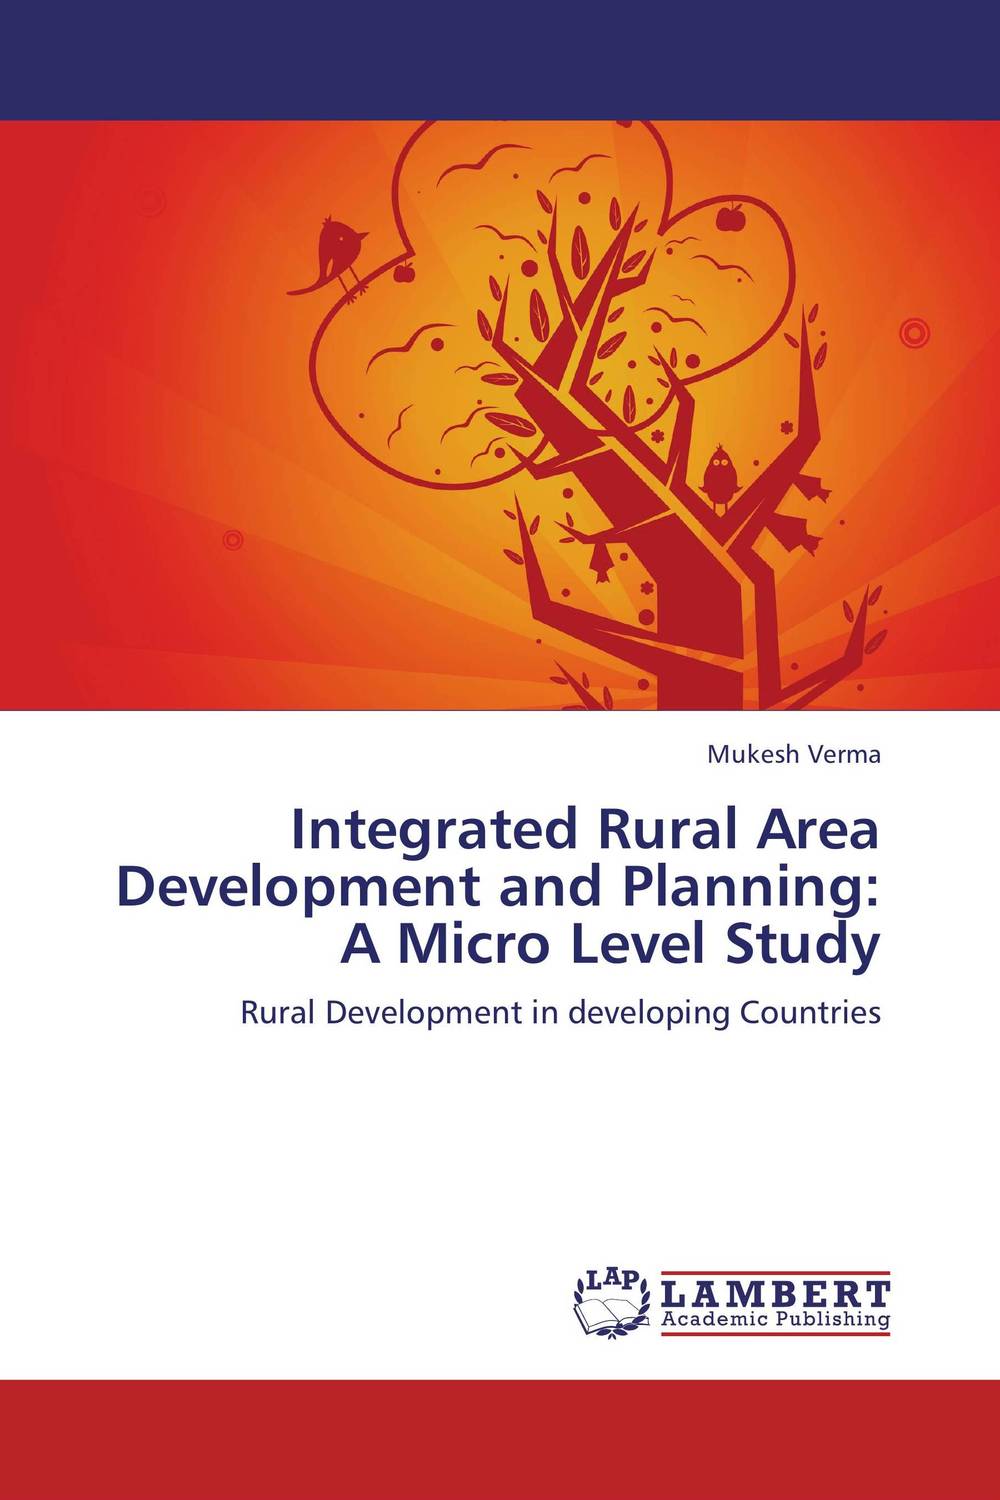 Integrated Rural Area Development and Planning: A Micro Level Study